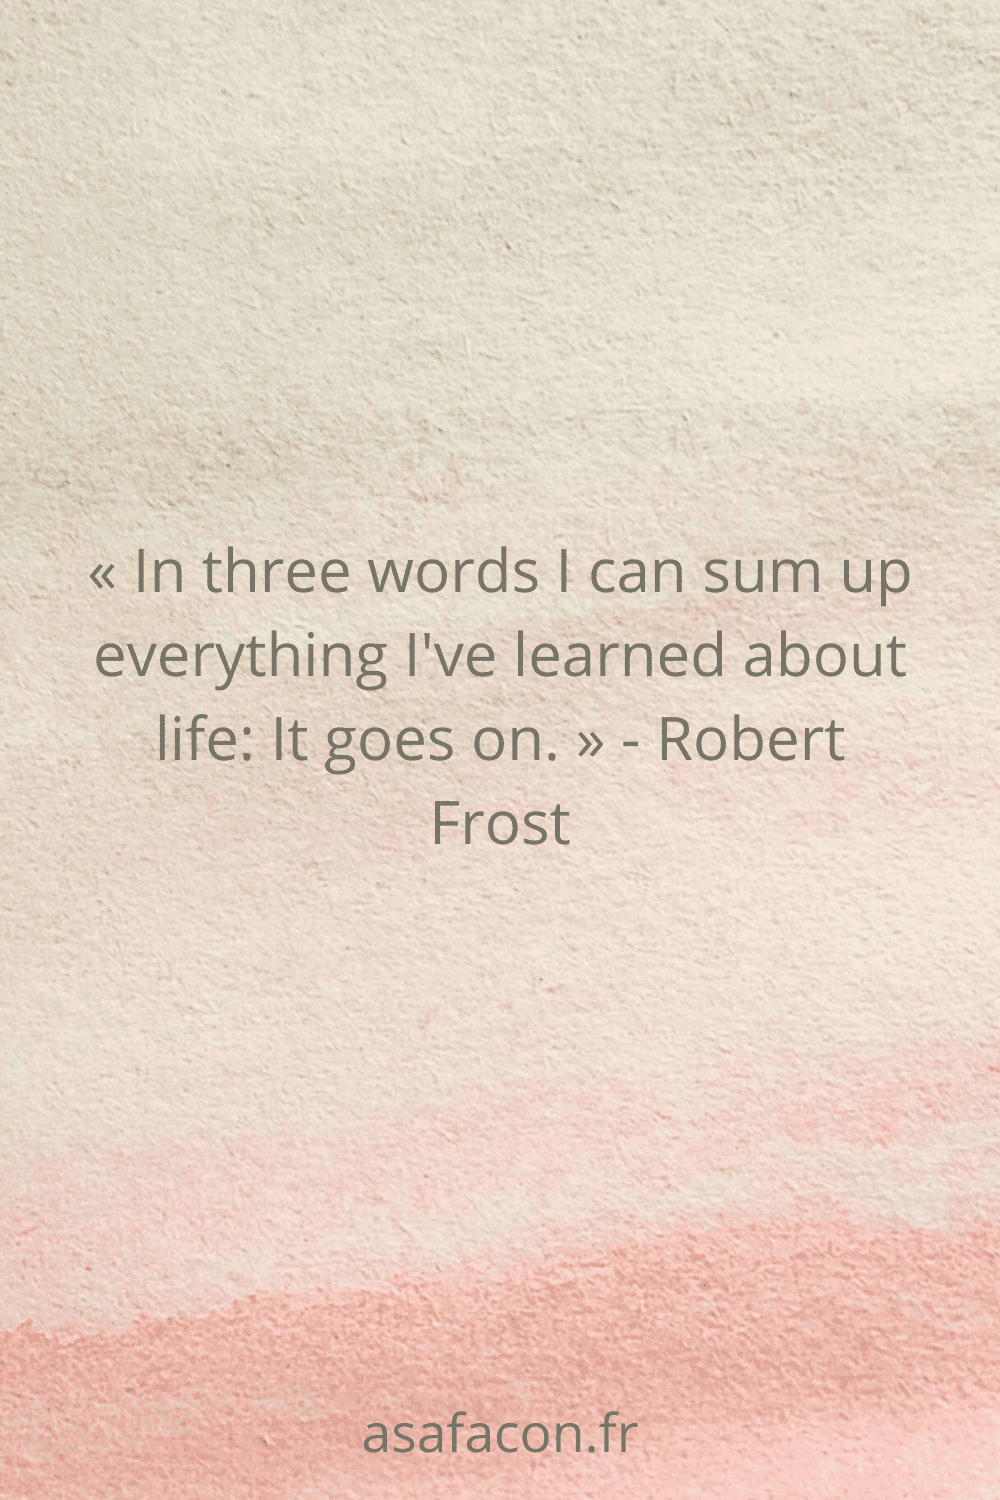 « In three words I can sum up everything I've learned about life It goes on. » - Robert Frost